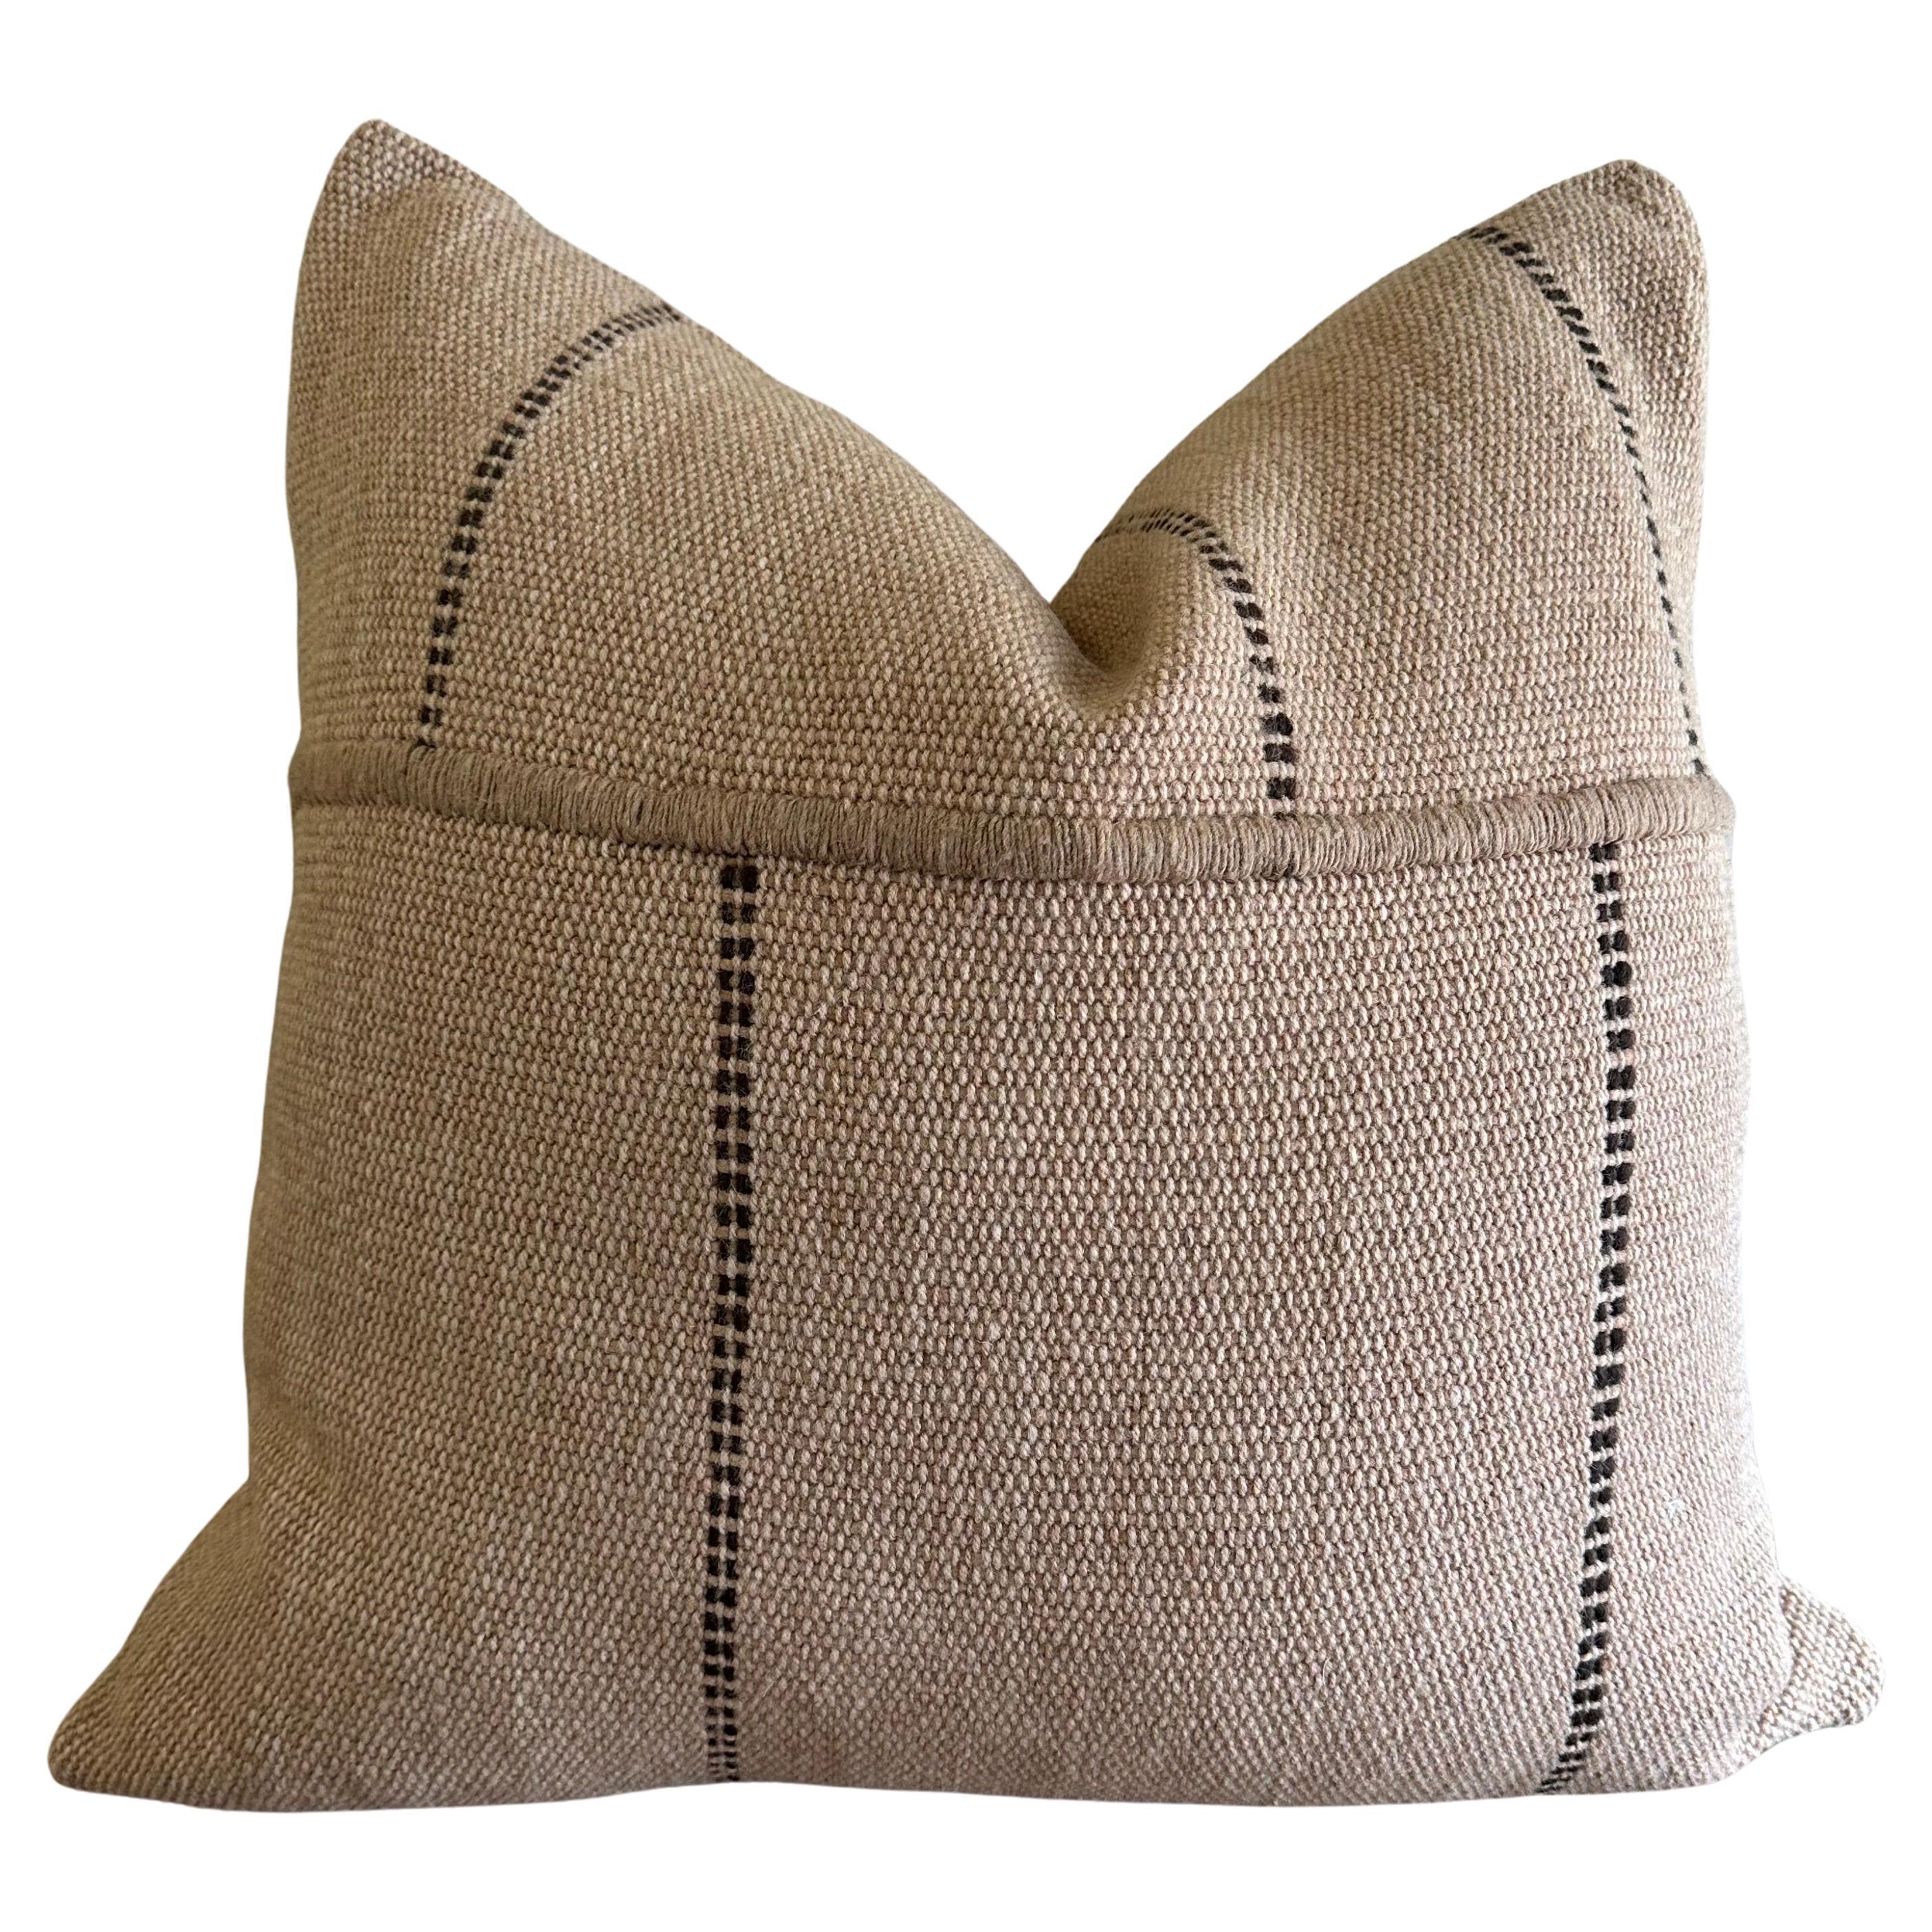 Custom Hand Made Wool Pillow with Stripes Includes Down Feather Insert